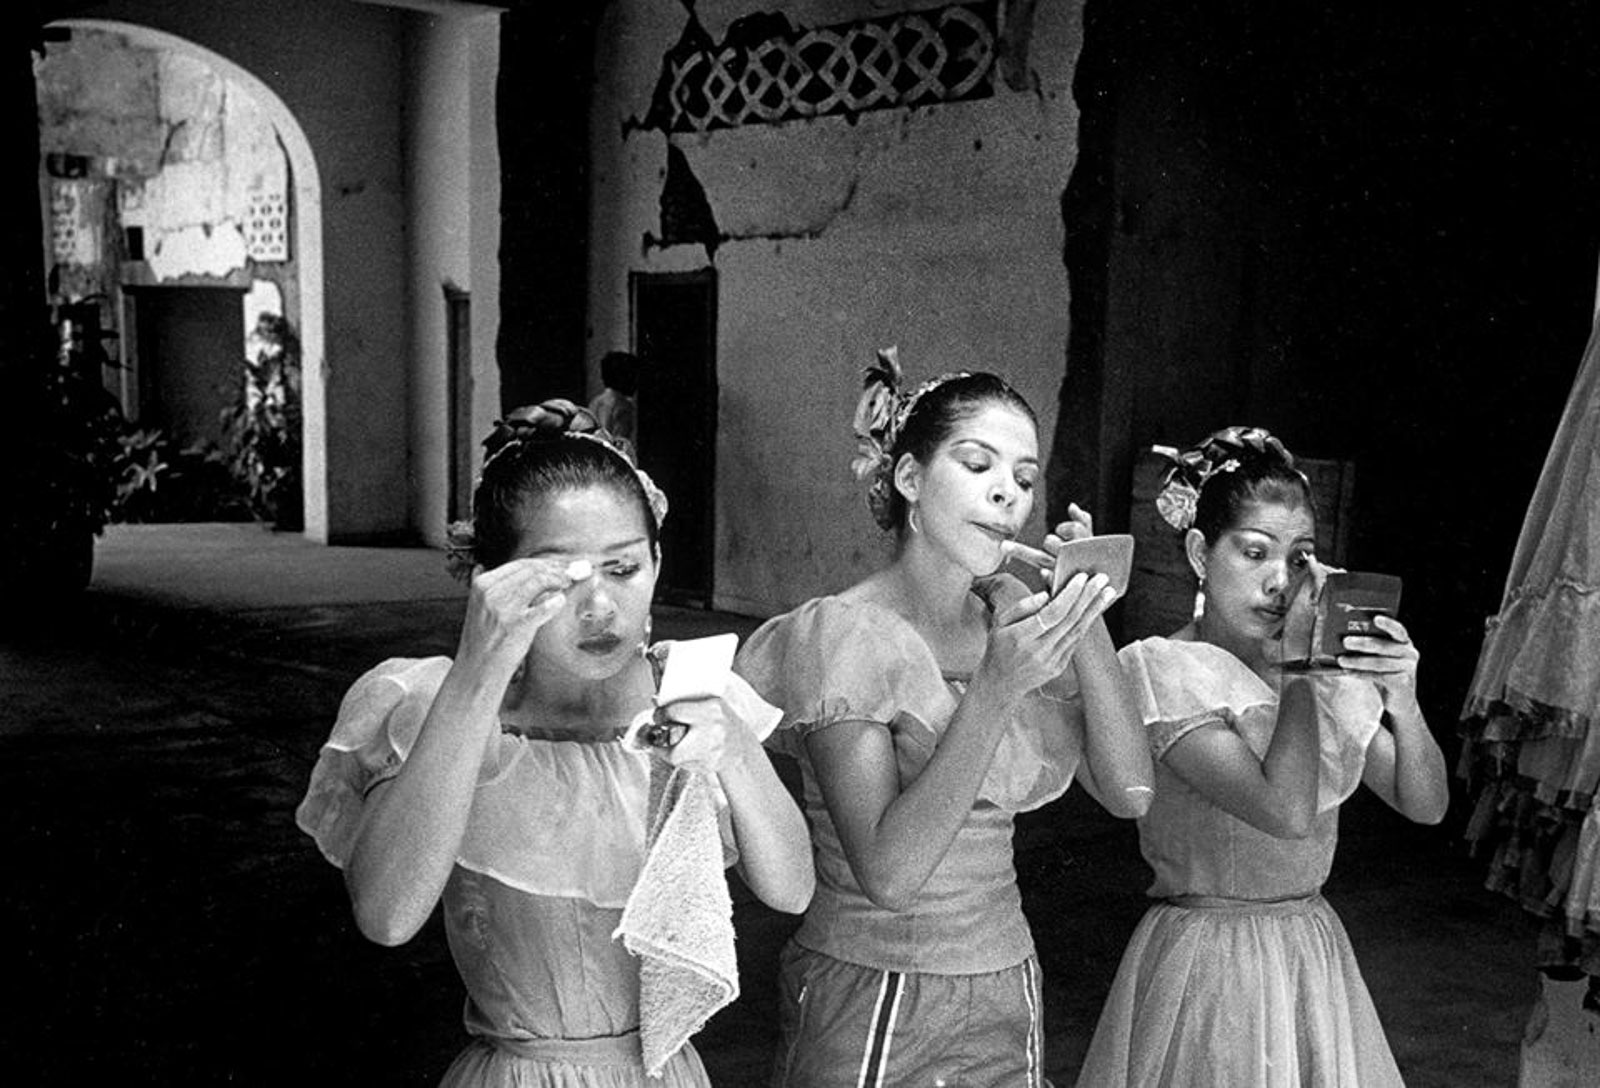 ALL DOLLED UP. Nicaraguan dancers put on make-up before their presentation preparing for their performance at the Grand Hotel, in Managua, Nicaragua. Photo by Rick Rocamora